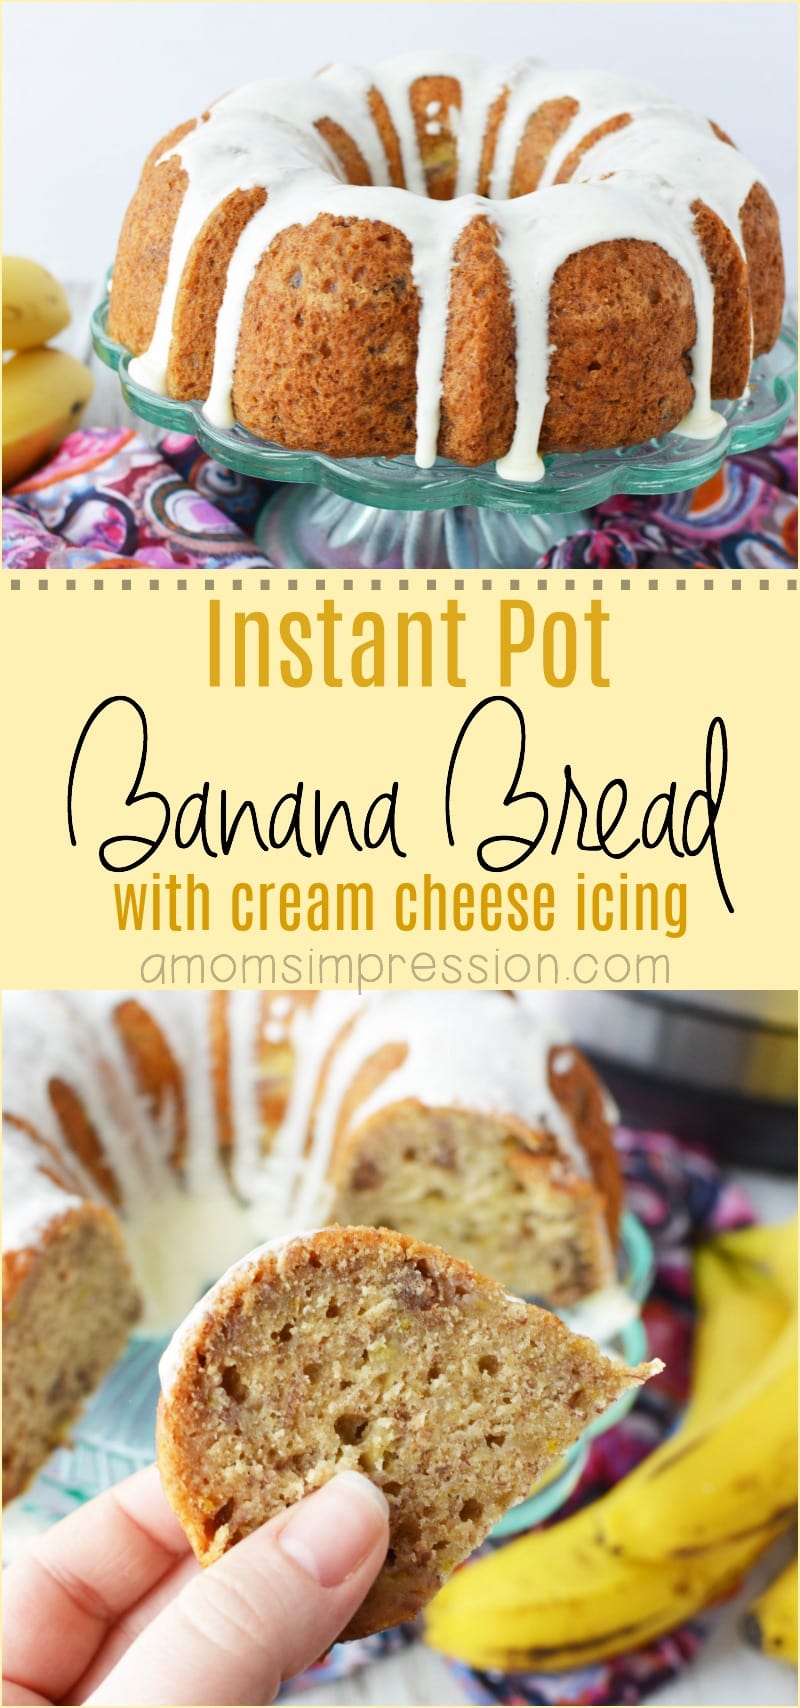 Did you know that your pressure cooker can make a super moist banana bread? Check out this easy Instant Pot Banana Bread recipe, it is the best dessert I have made in awhile!